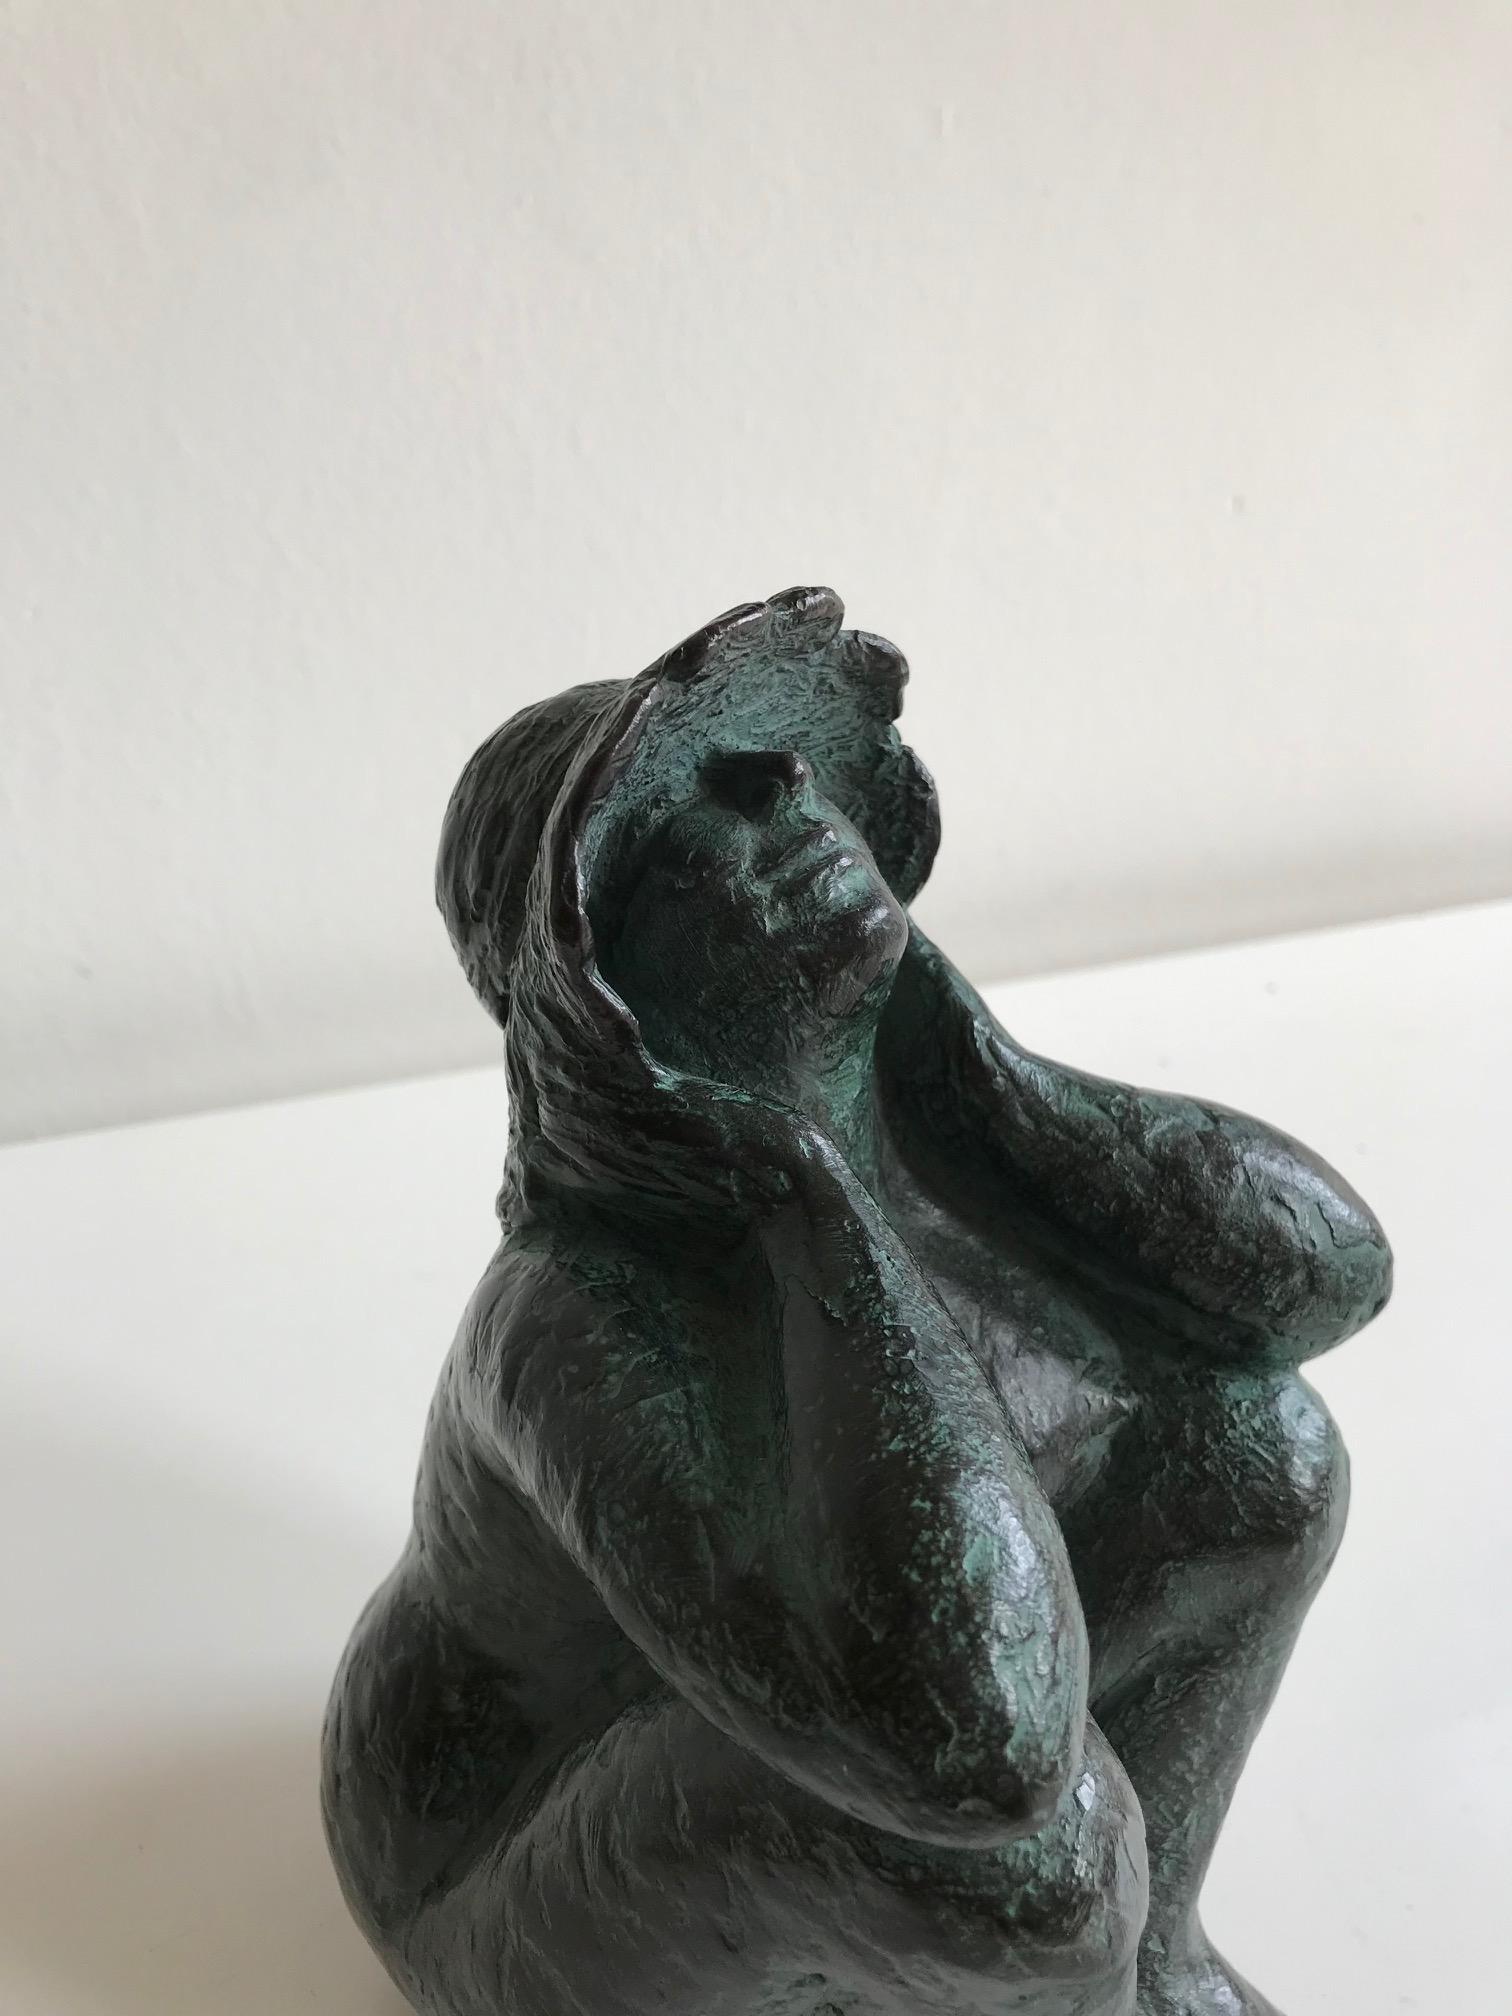 Karin Beek's (1948) bronze sculptures are characterized by a friendly, round and at the same time monumental style. They breathe the atmosphere of everyday life. Beek would like her sculptures to be accessible, touch the viewer and, also, invite